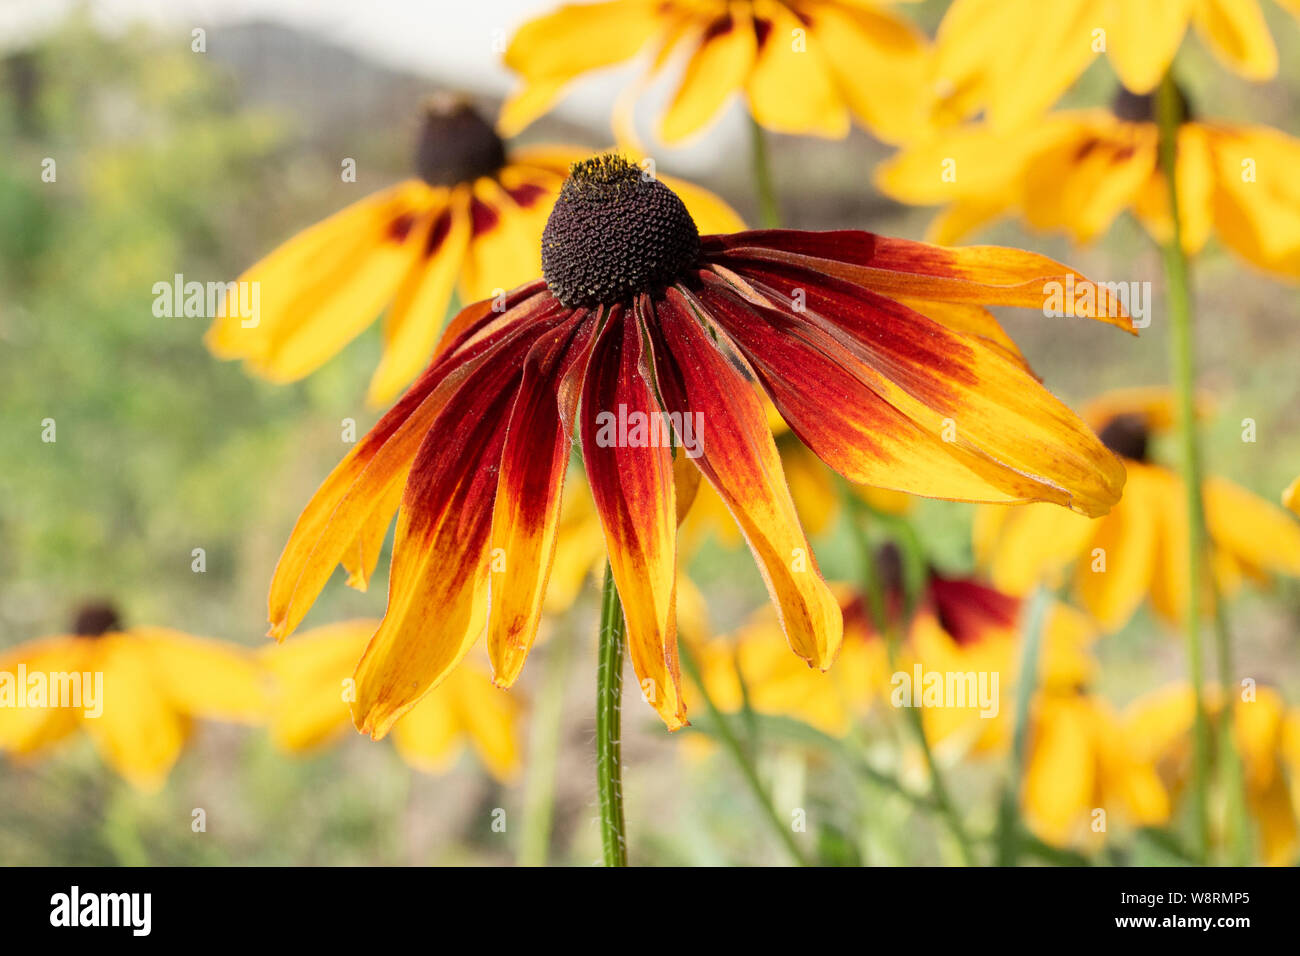 Yellow aster garden flowers Rudbeckia hirta, perennial asteraceae decorative garden flowers. Yellow flower with long petals and a dark middle Stock Photo